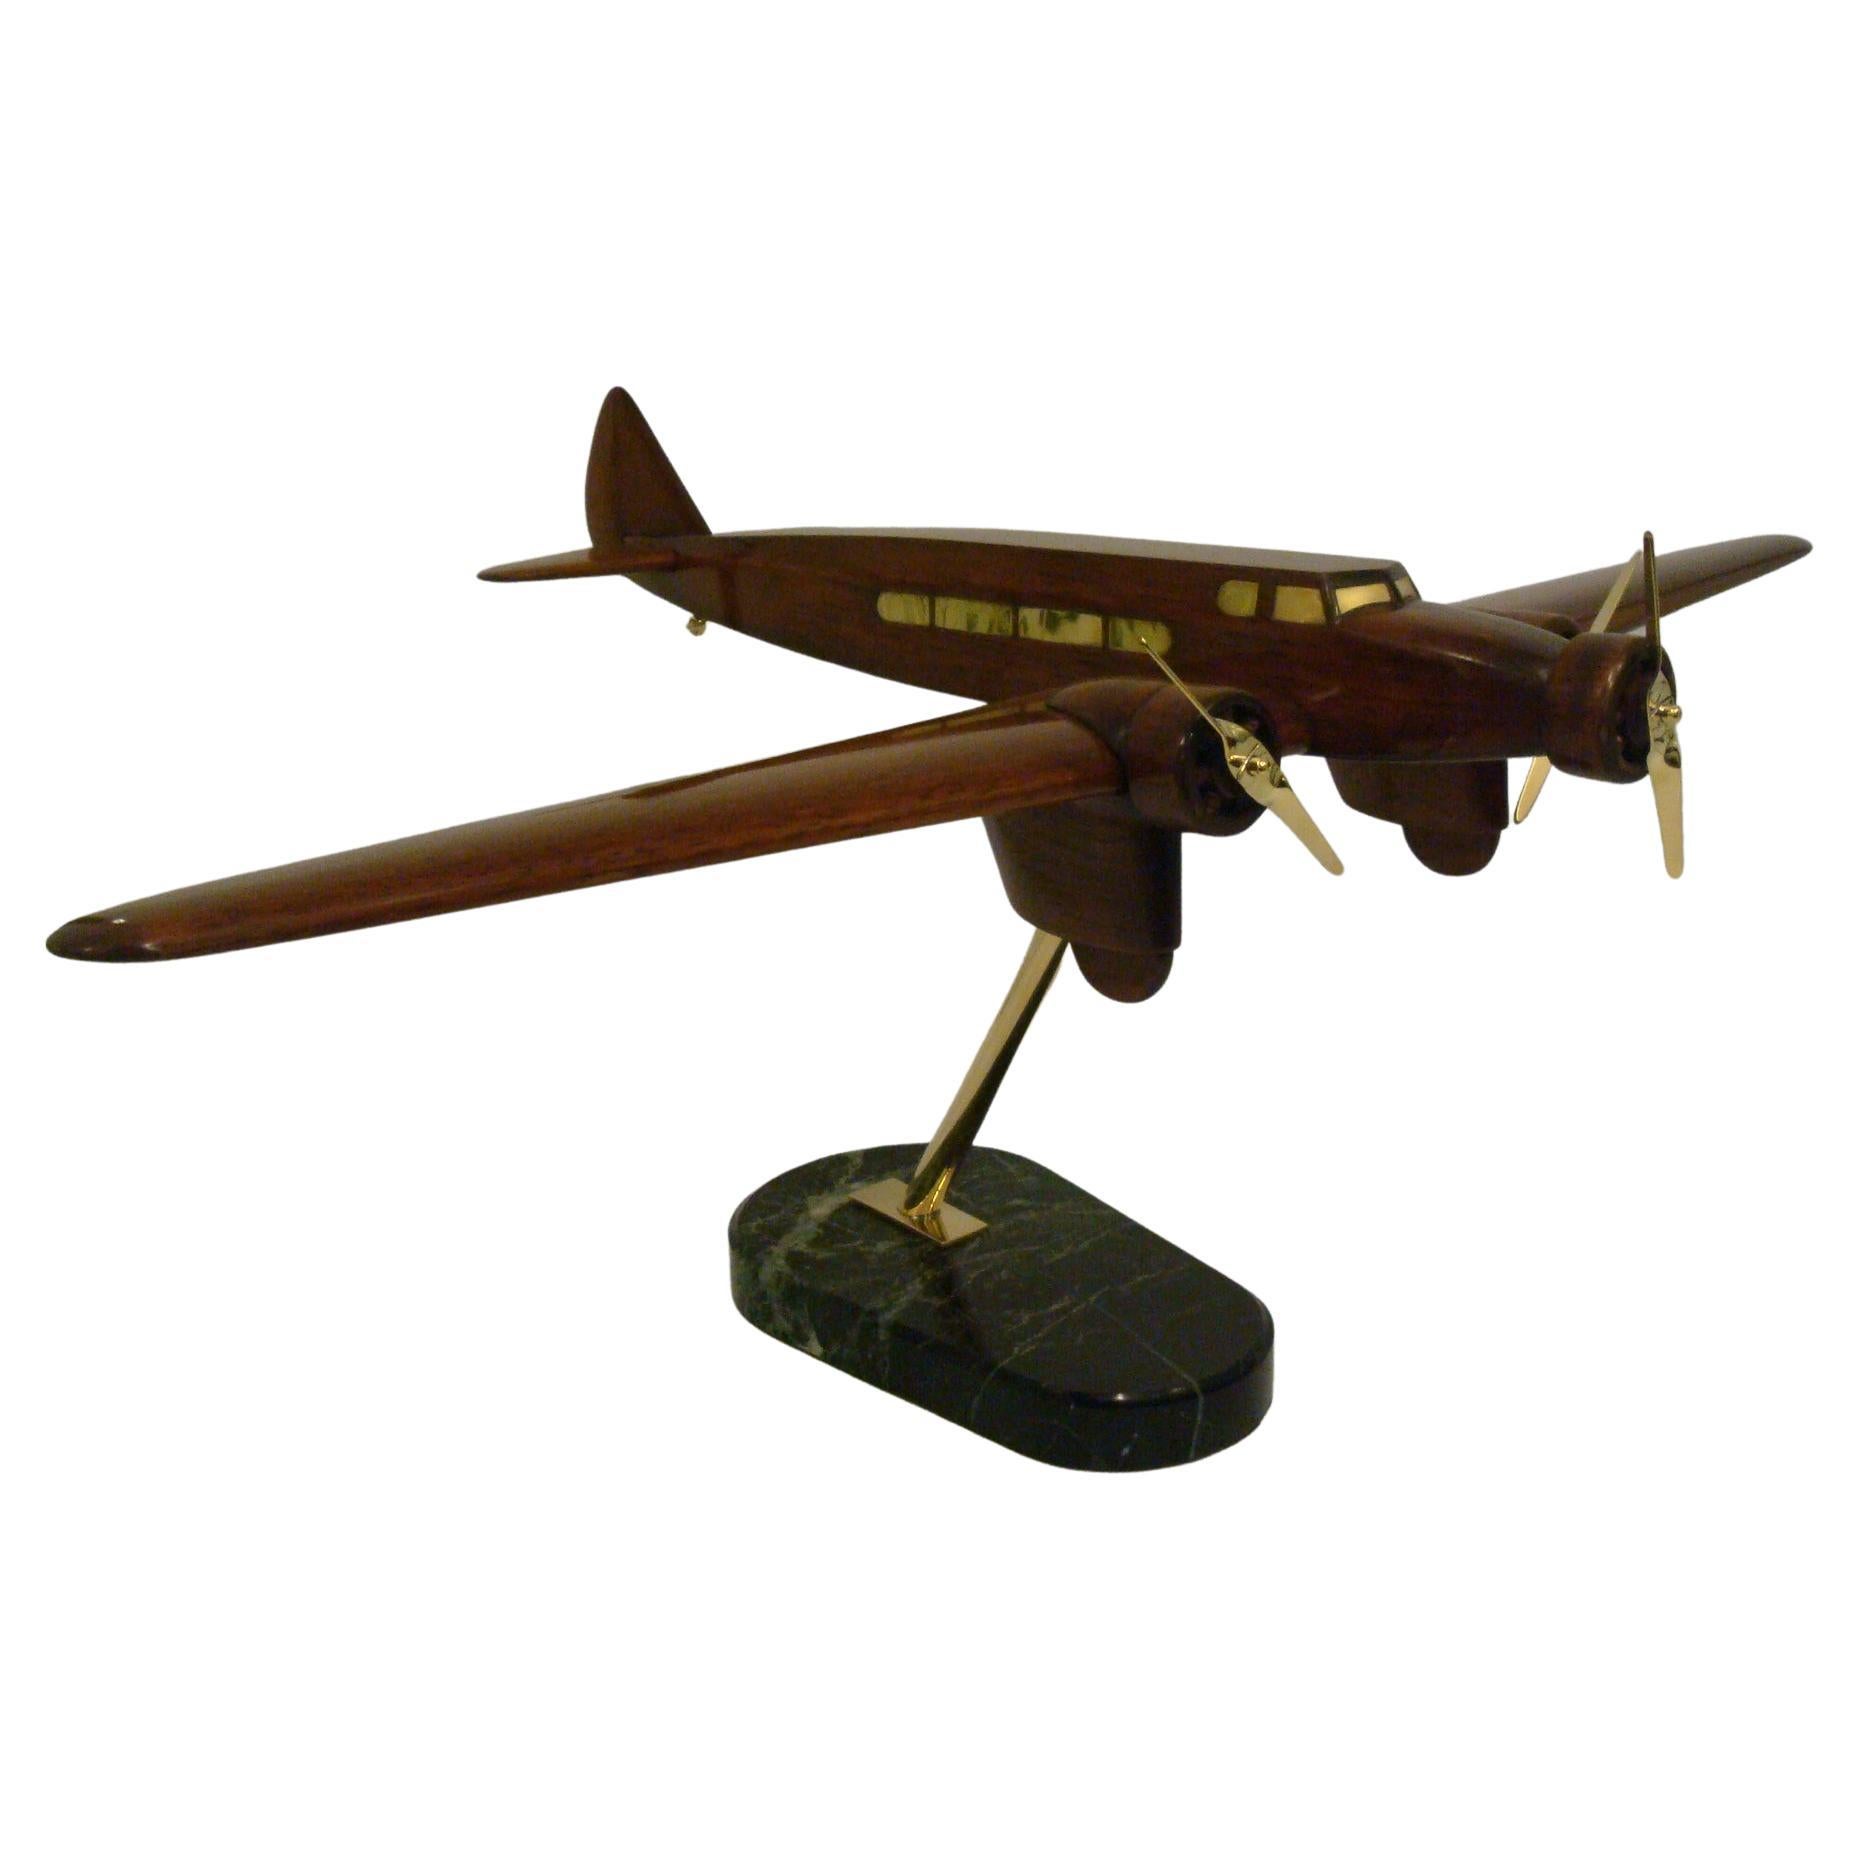 Art Deco Dewoitine Wooden Counters Desk Model Airplane 1930s French